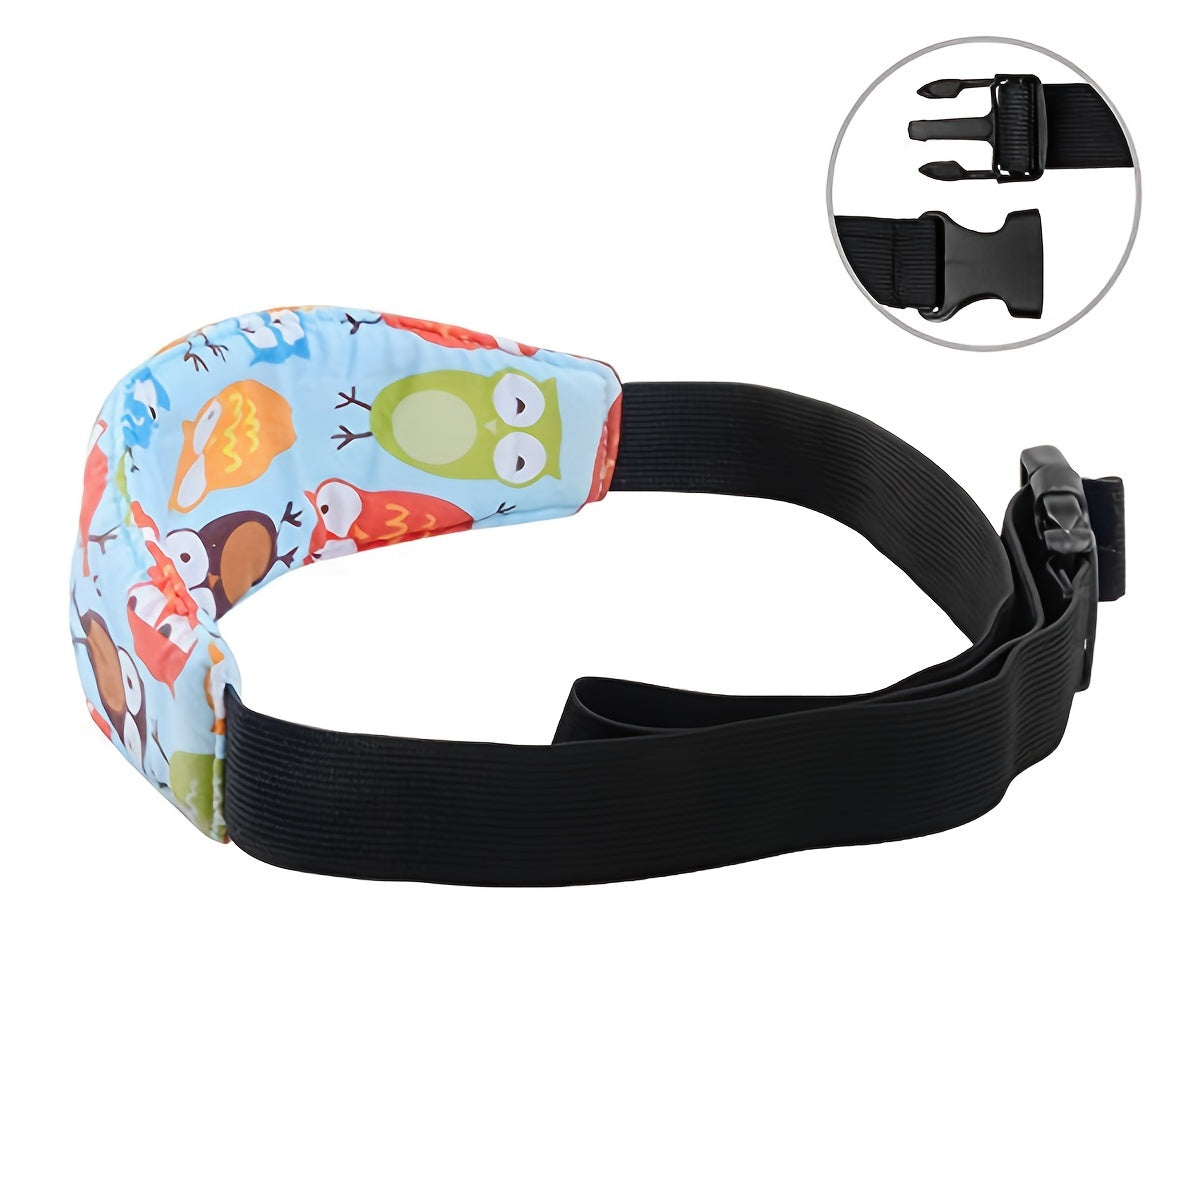 Baby Head Support For Car Seat, Toddler Headband, Baby Stroller Car Seat, Sleeping Head Support